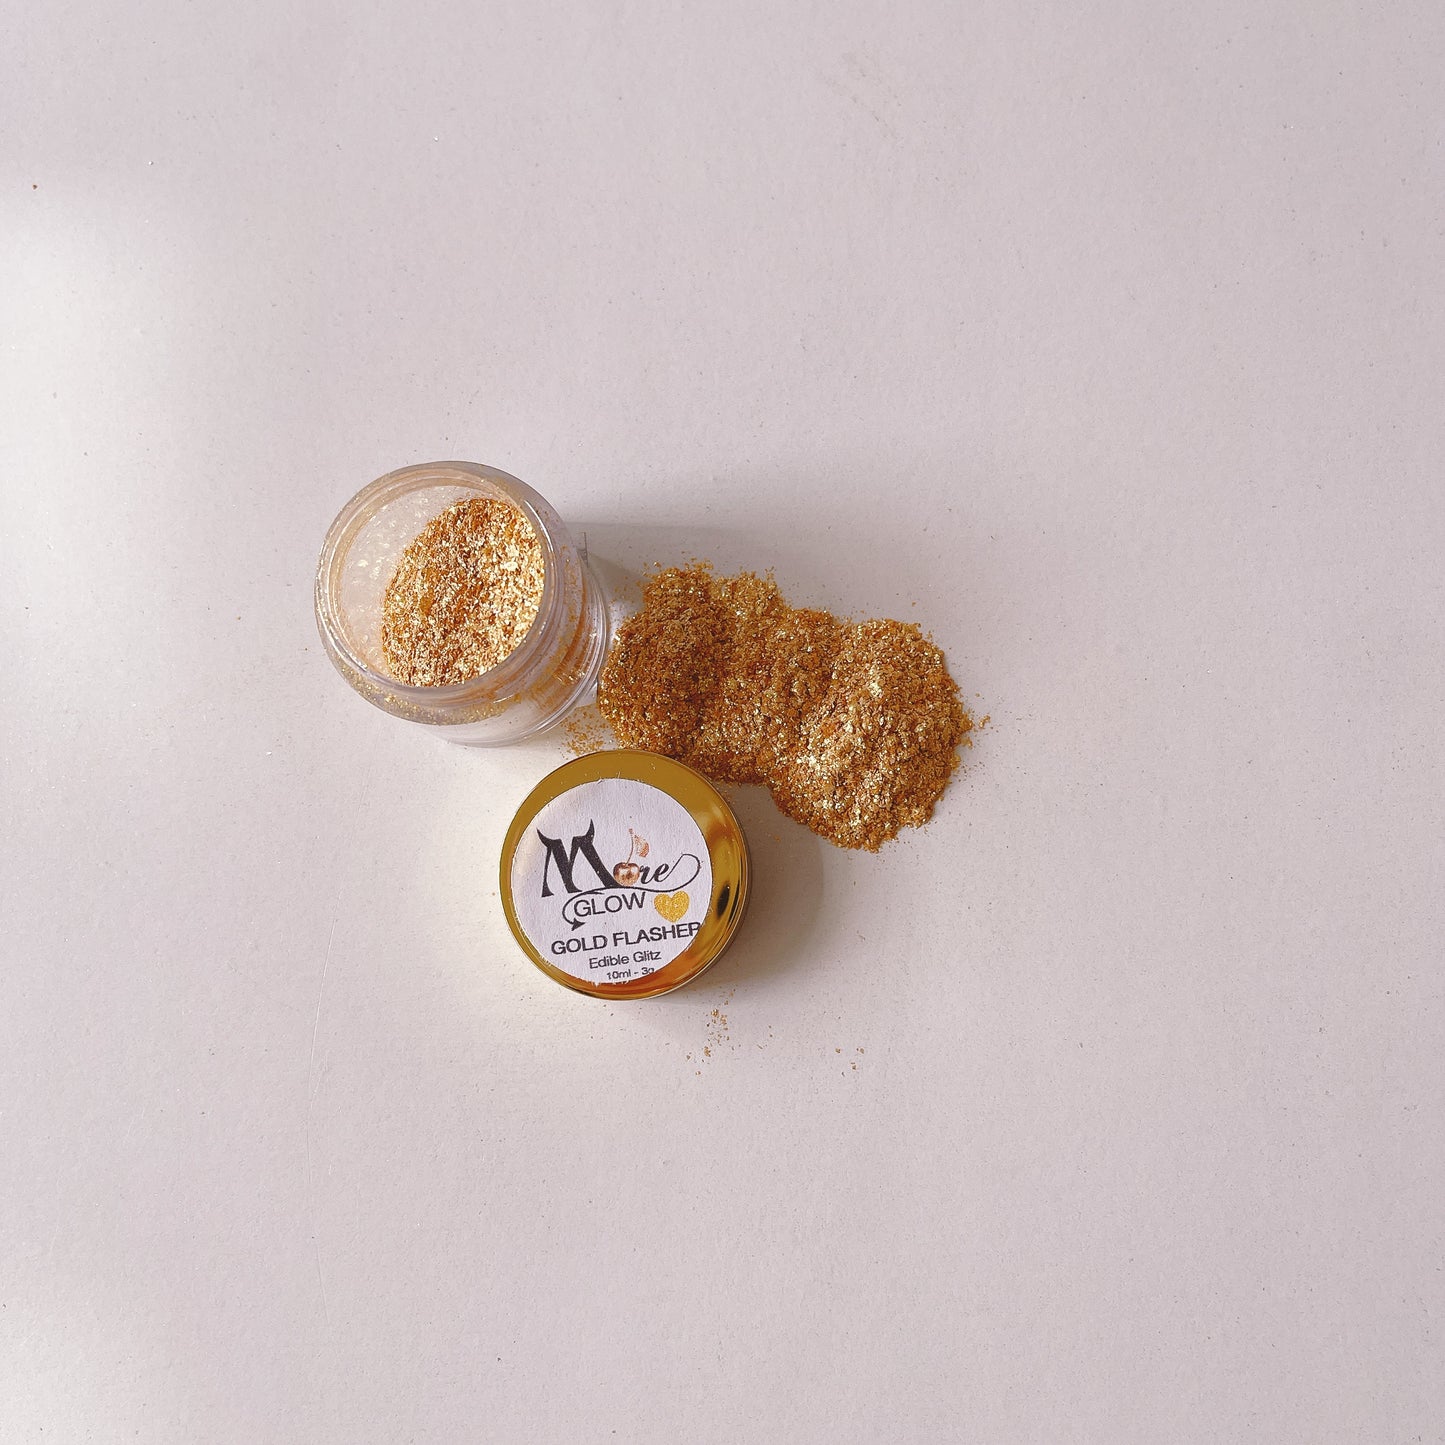 More Glow Gold Flasher Edible Glitter Dust